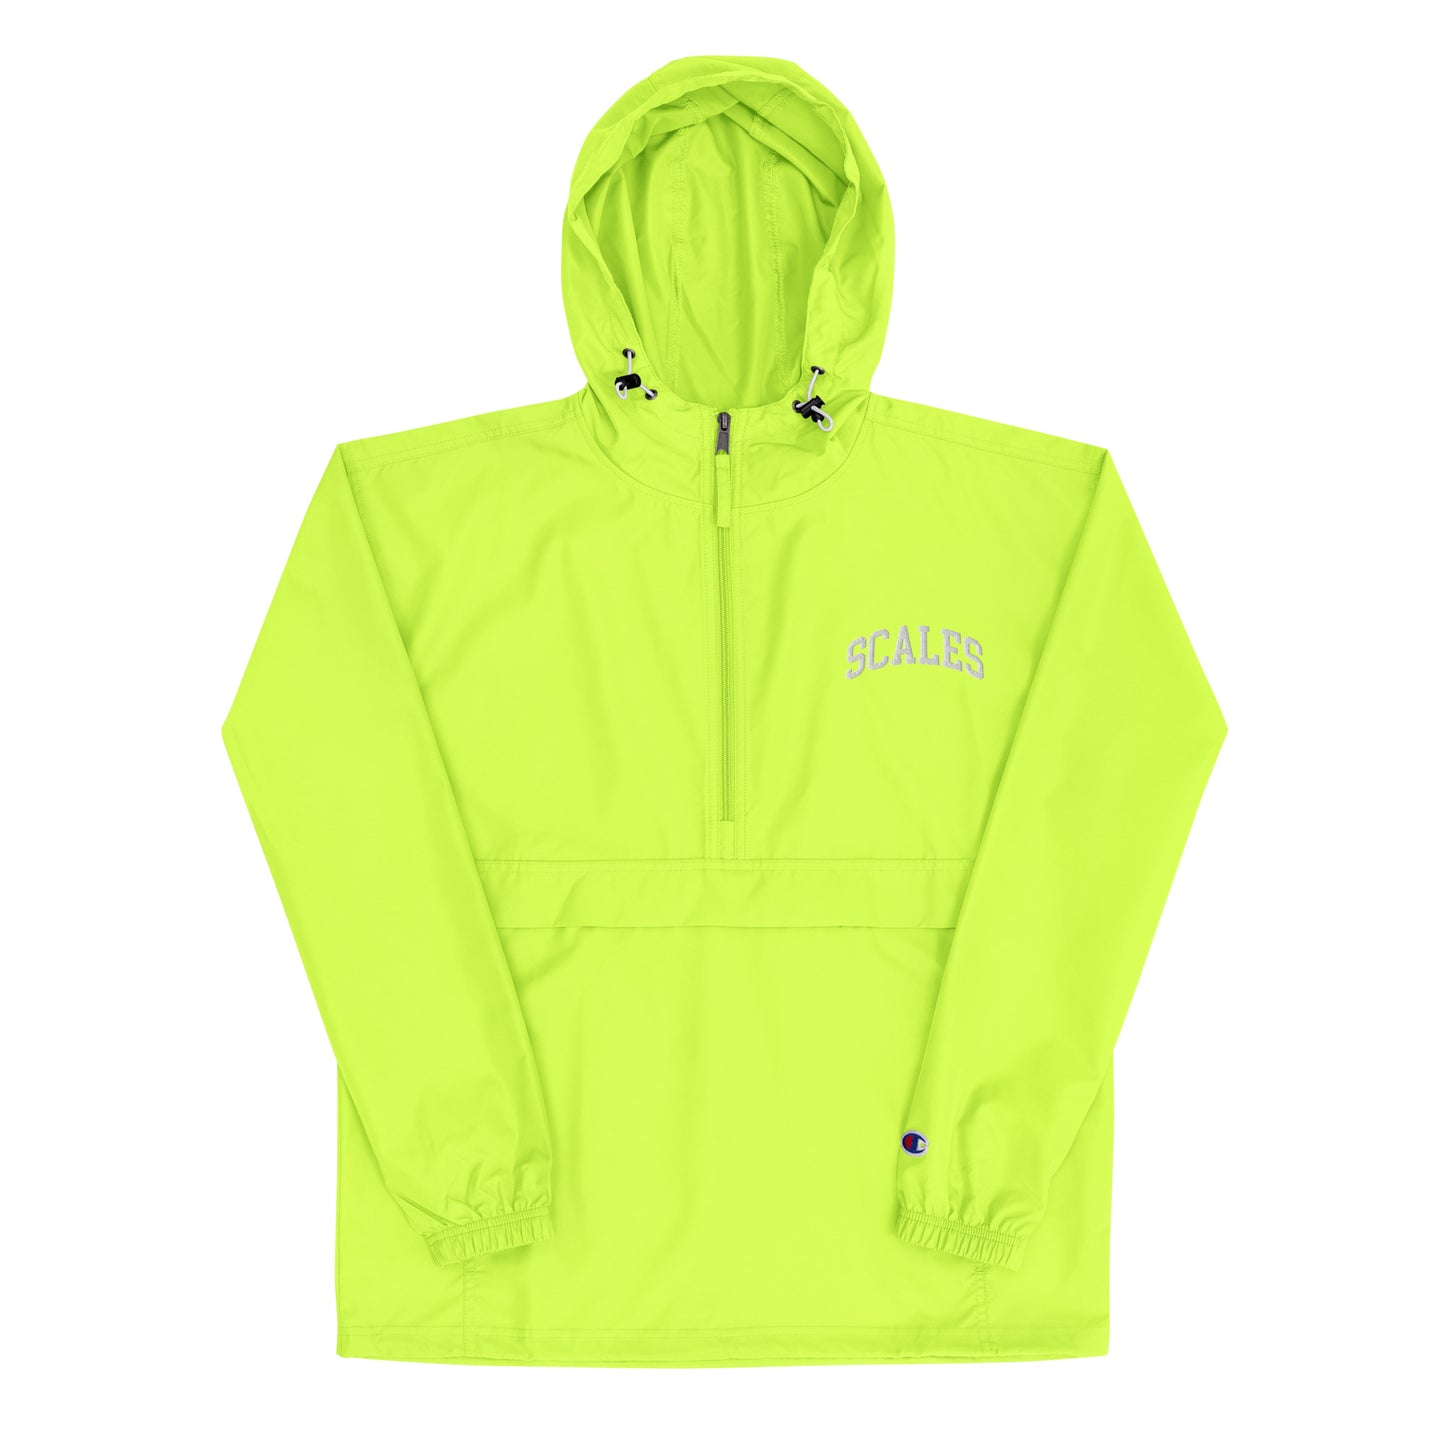 Scales Packable Jacket